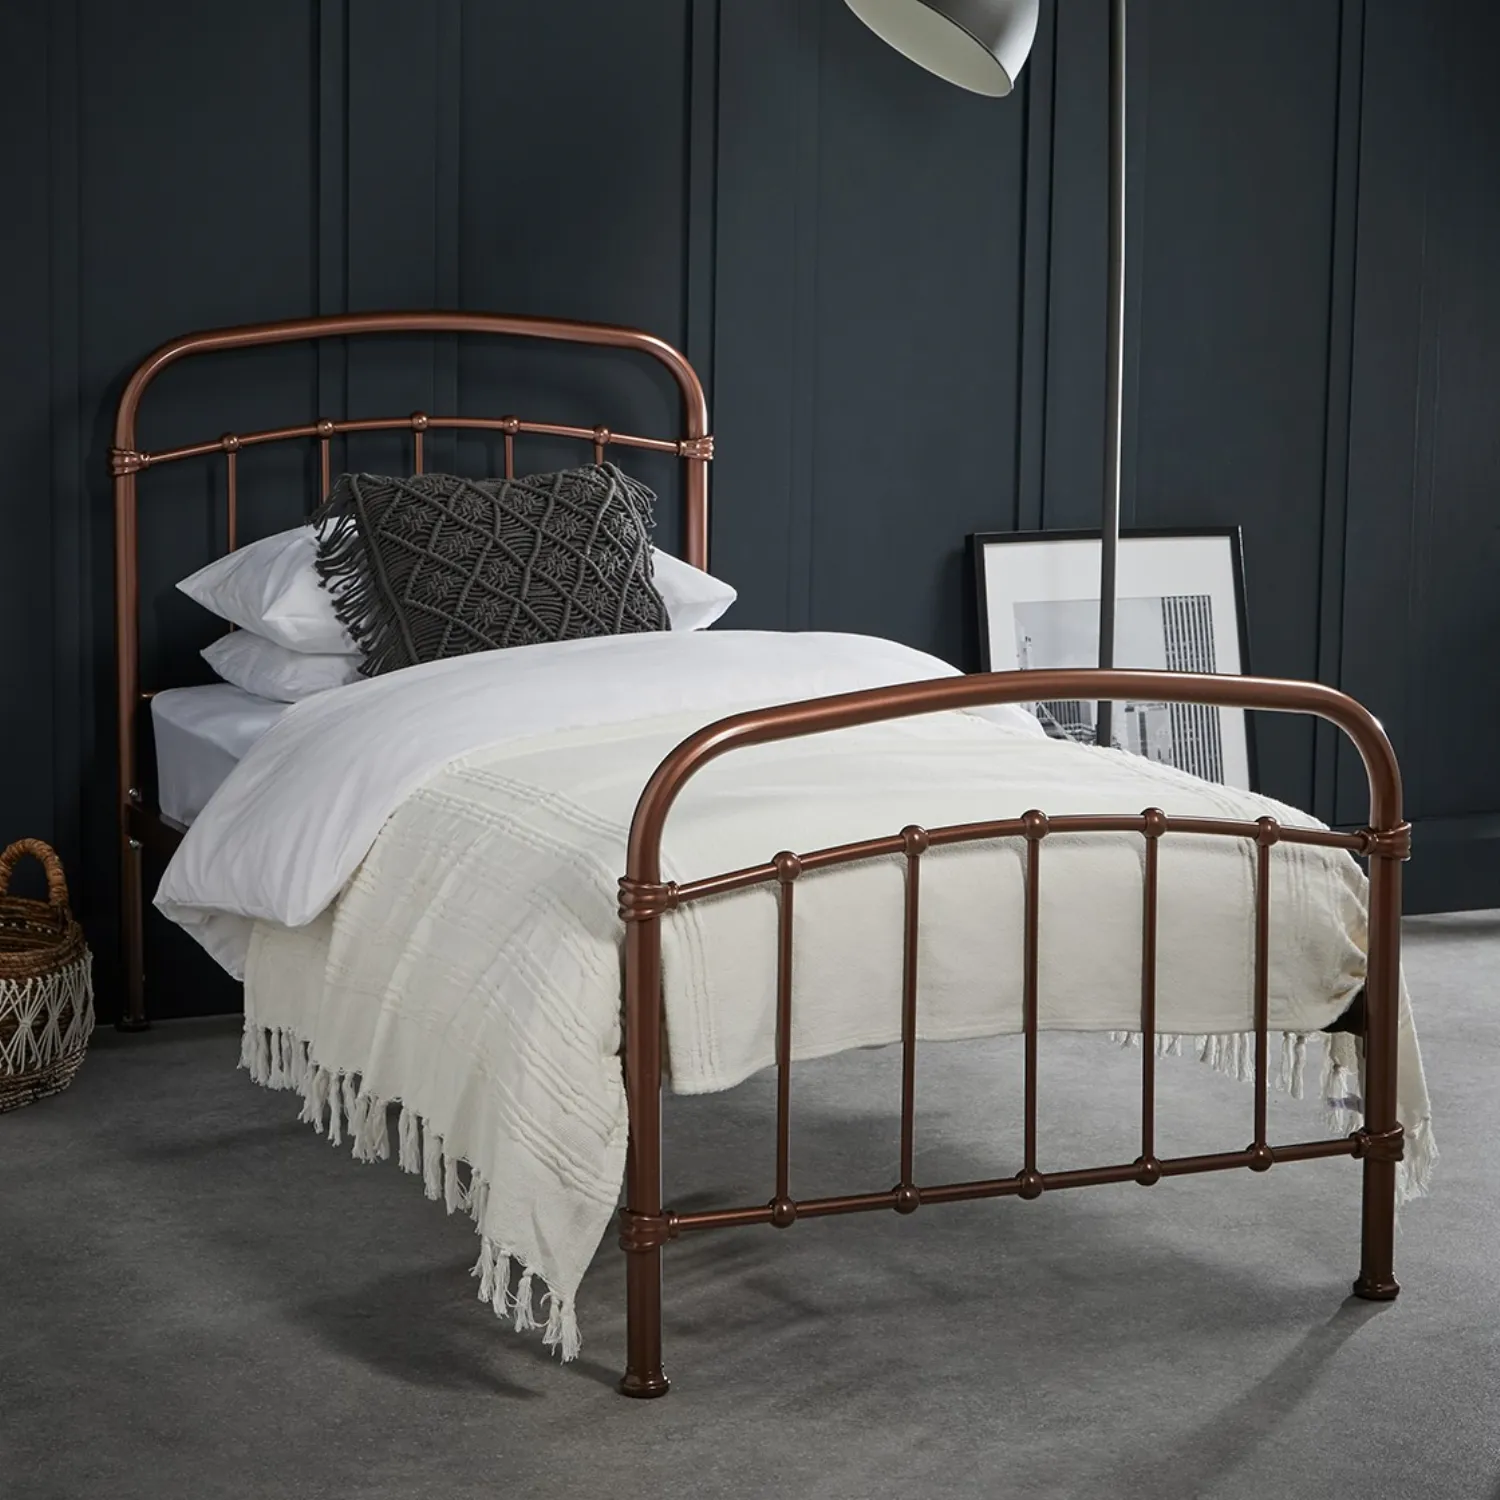 3ft Single 90cm Metal Copper Curved Bed Frame Industrial Style